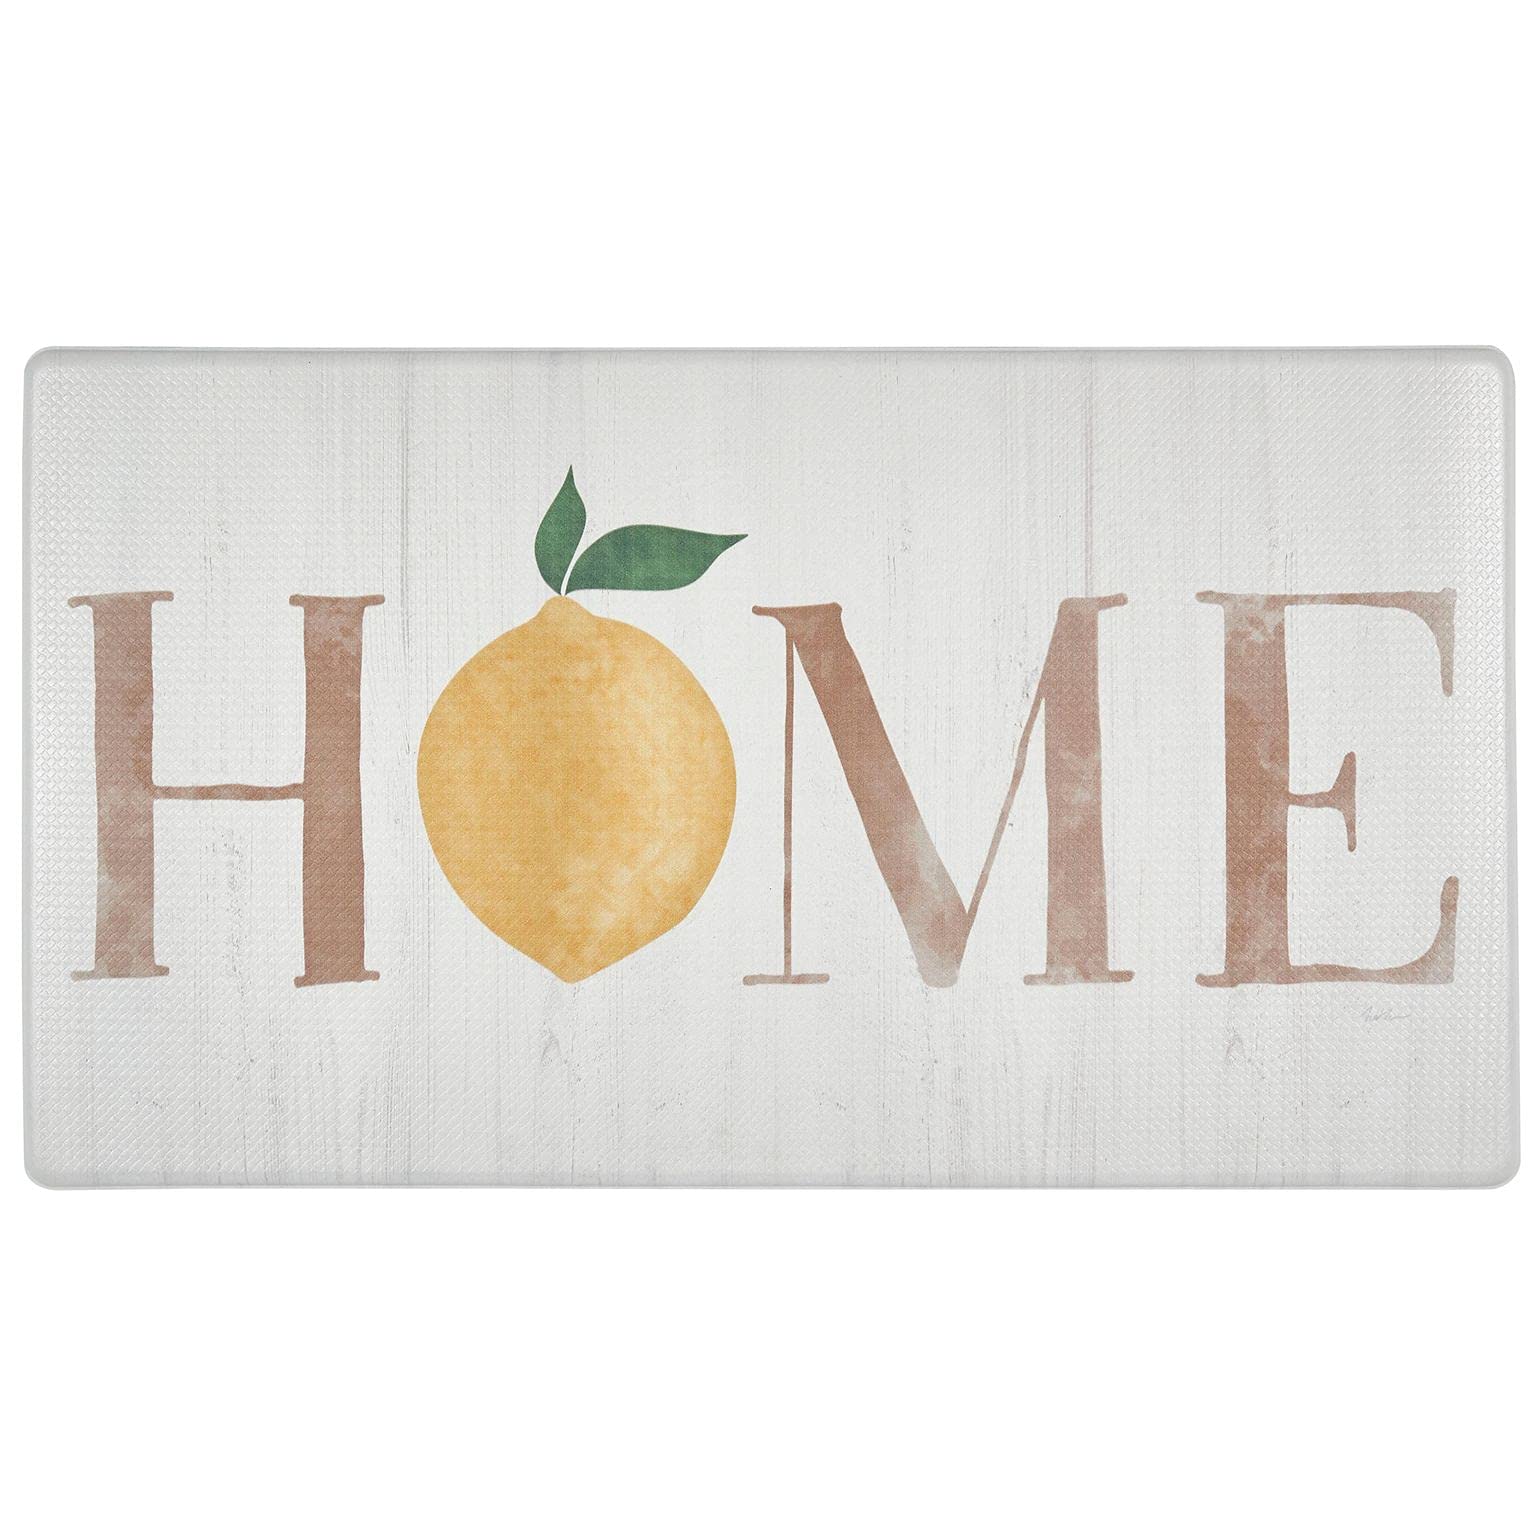 SoHome cozy Living Anti-Fatigue Kitchen Mat For Floor, Lemon-Themed cushioned Kitchen Runner Rug, Non Slip, Easy Wipe clean, 12 